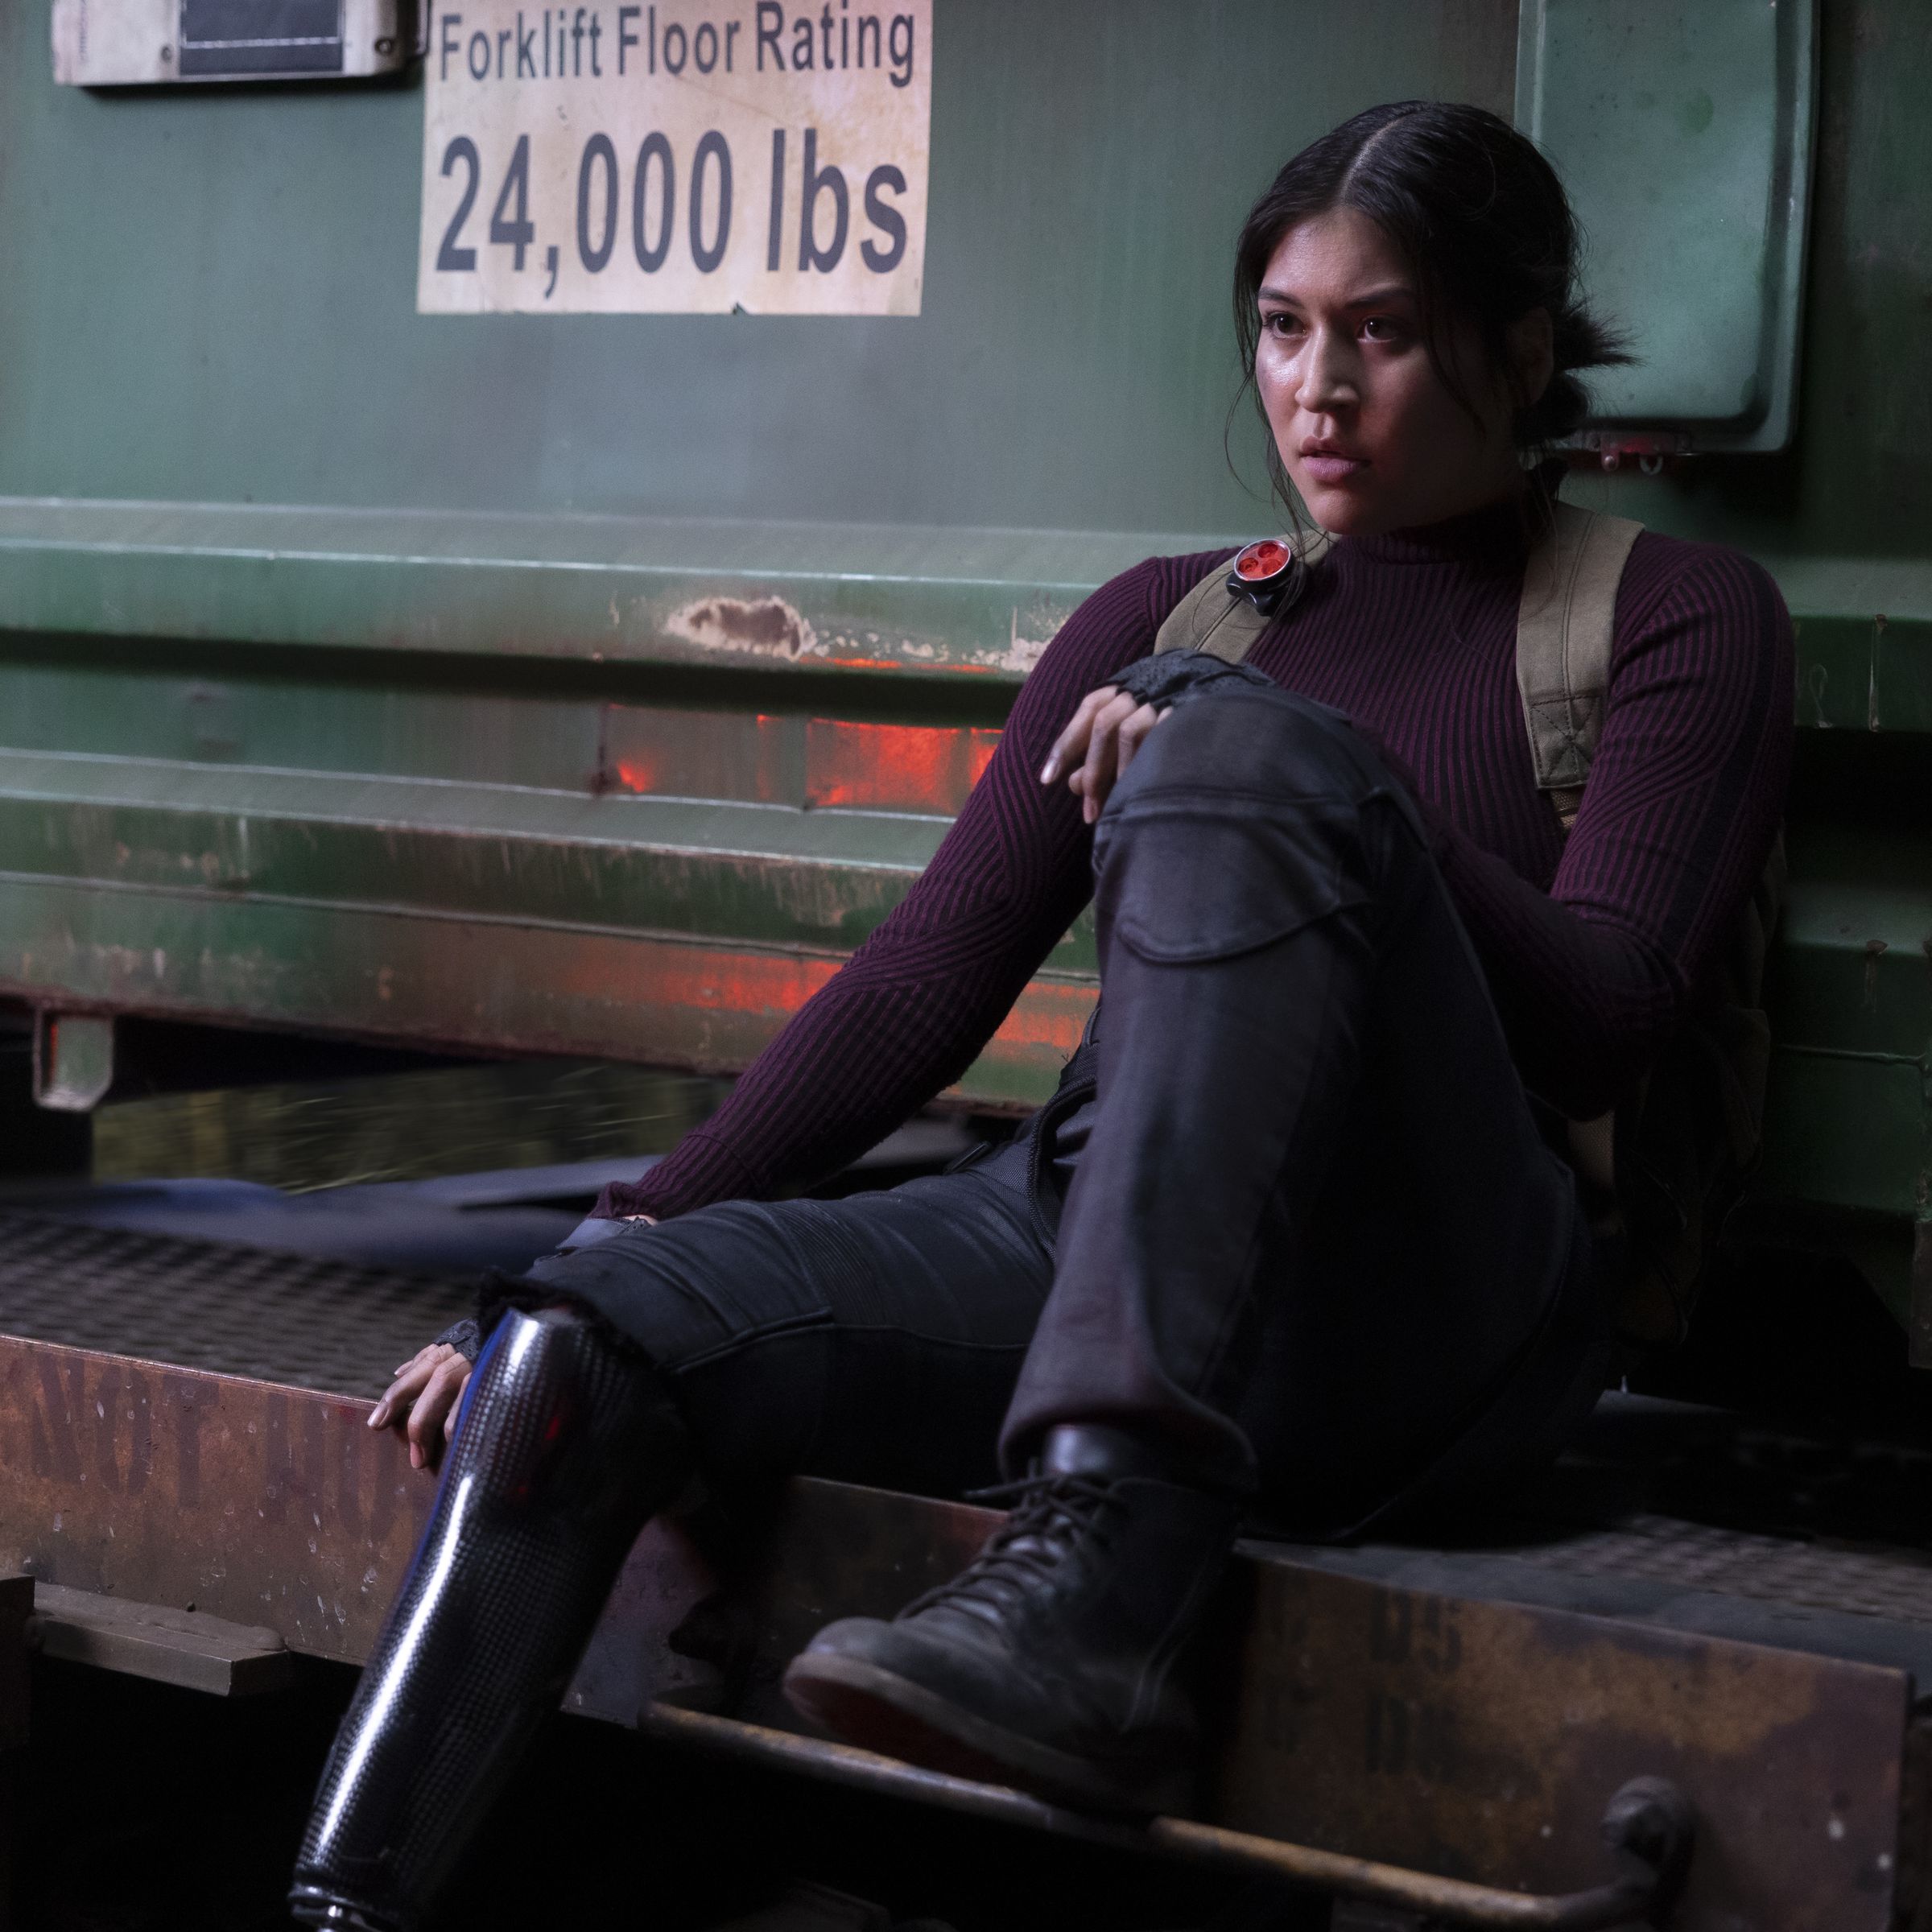 An image of Alaqua Cox as Maya Lopez. She’s dressed in combat gear and sitting on machinery looking exhausted after a fight.